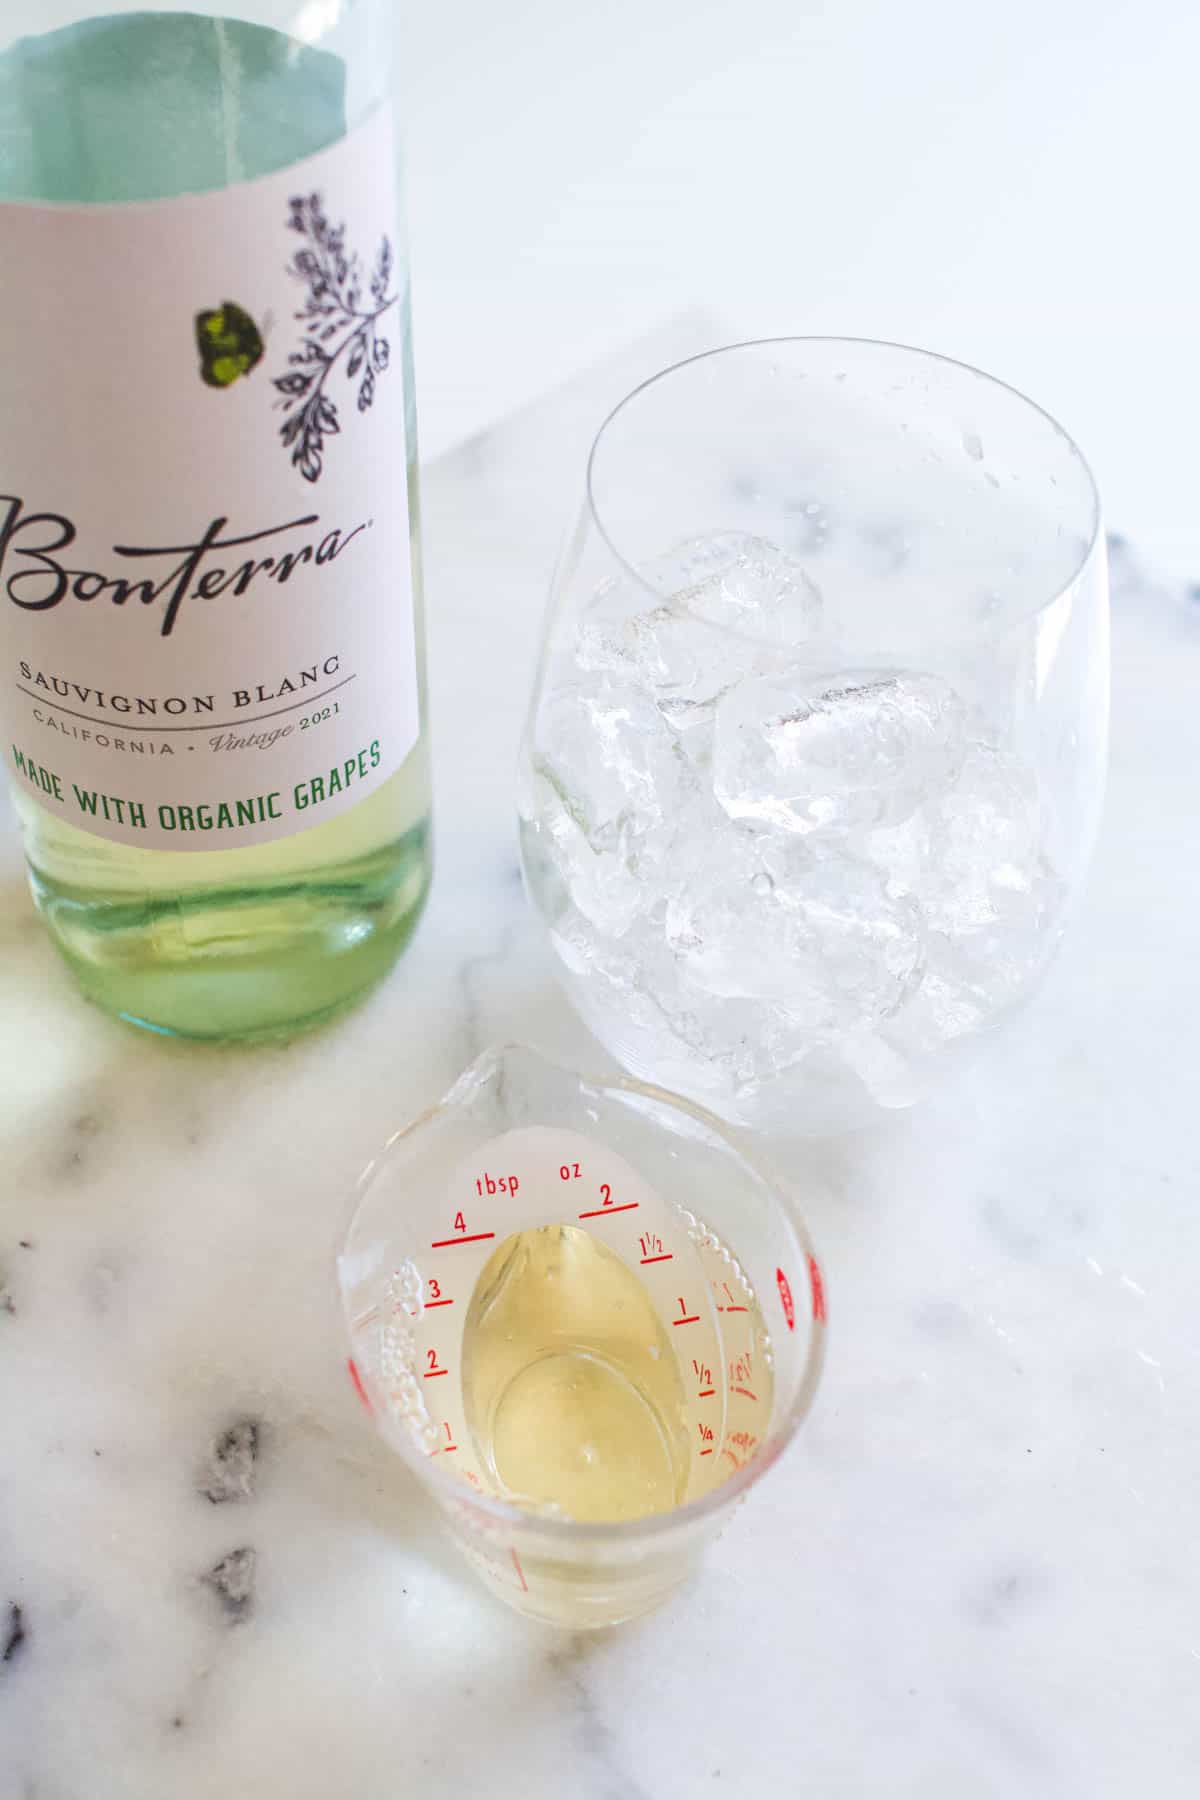 White wine in a clear measuring cup in front of a glass filled with ice and a bottle of white wine.